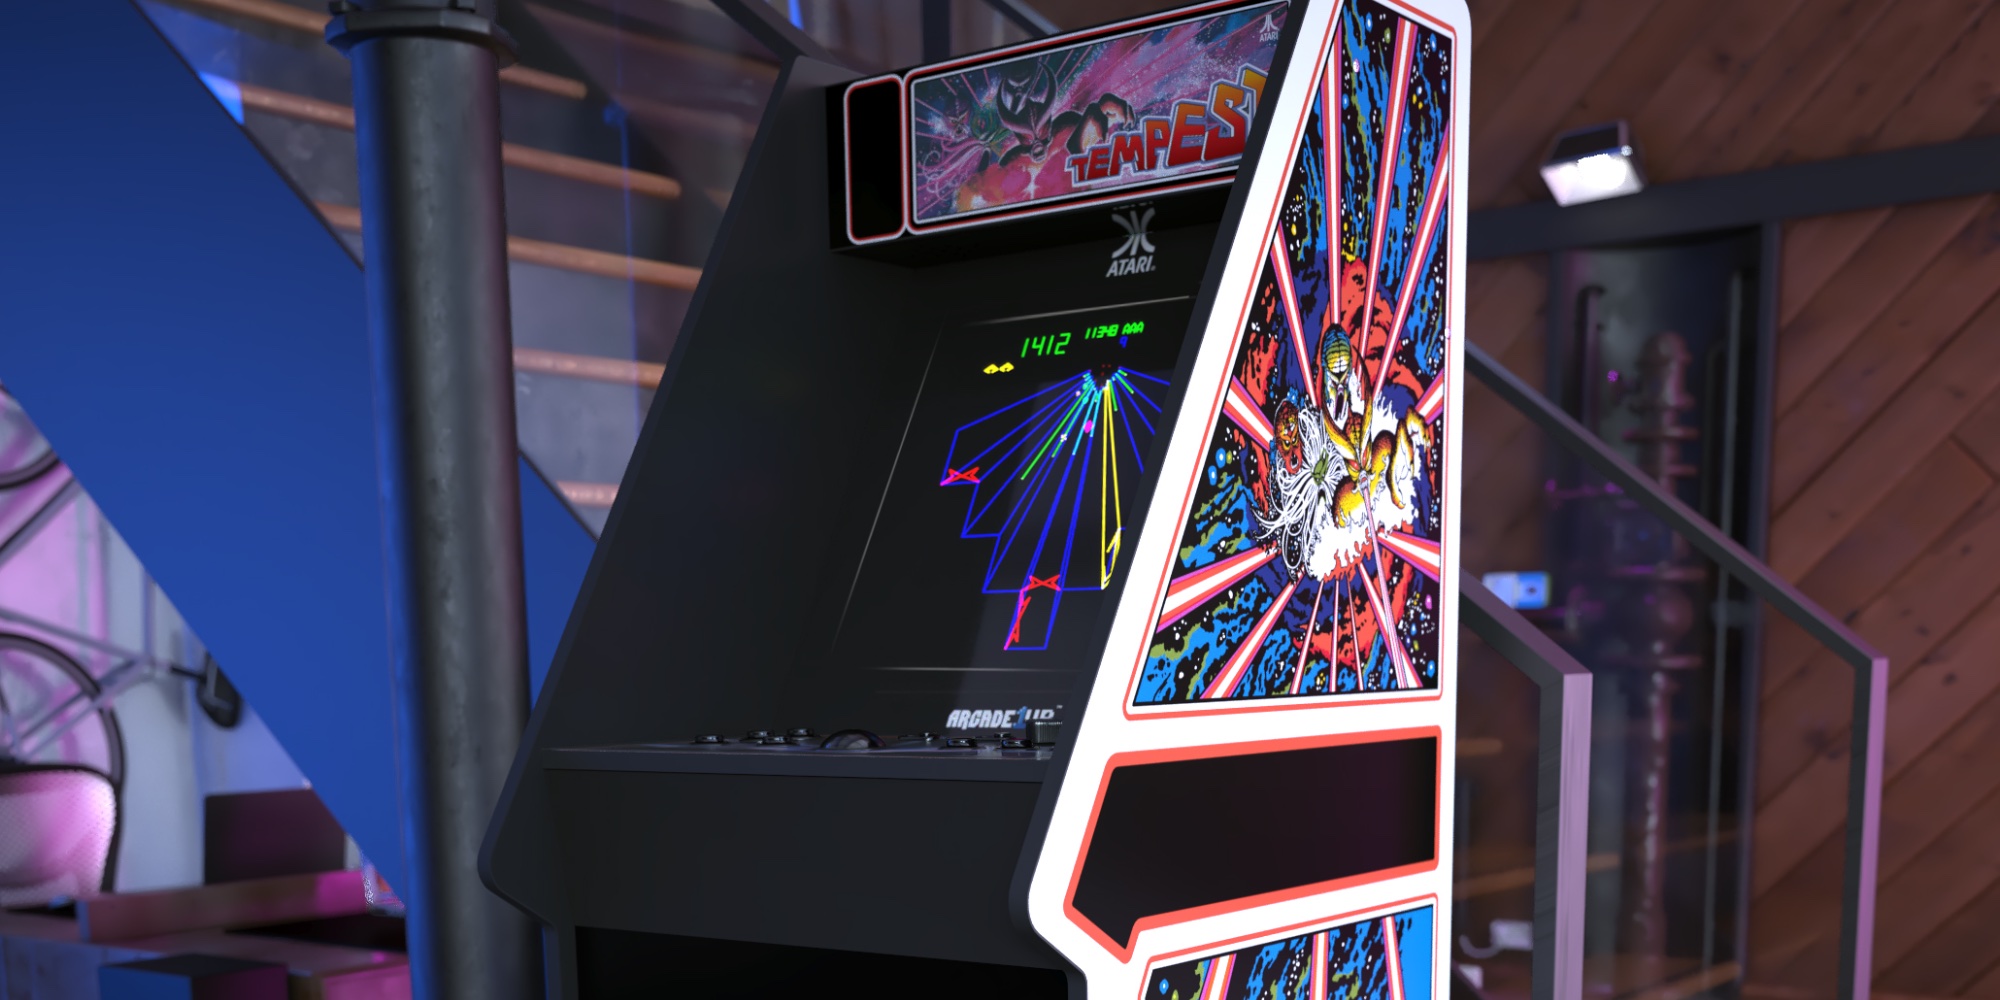 Arcade1Up CES releases Pong, XMen, and much more 9to5Toys